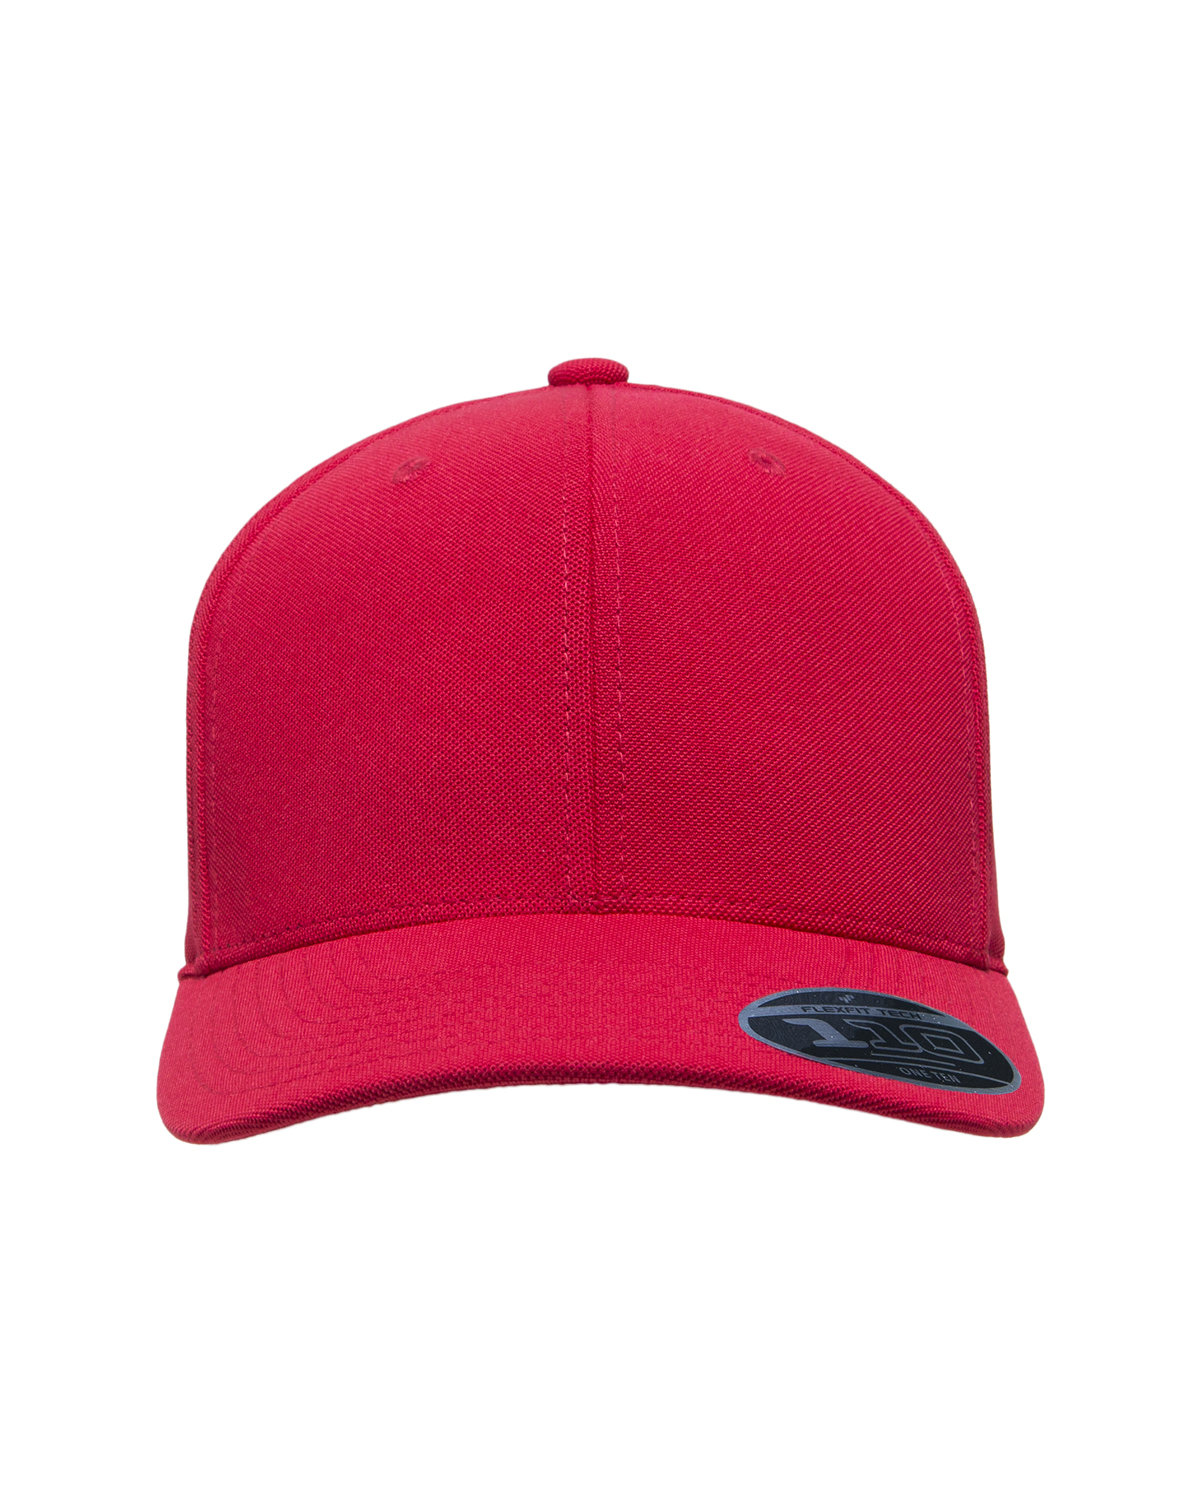 Team 365 by Flexfit Adult Cool & Dry Mini Pique Performance Cap SPORT RED 